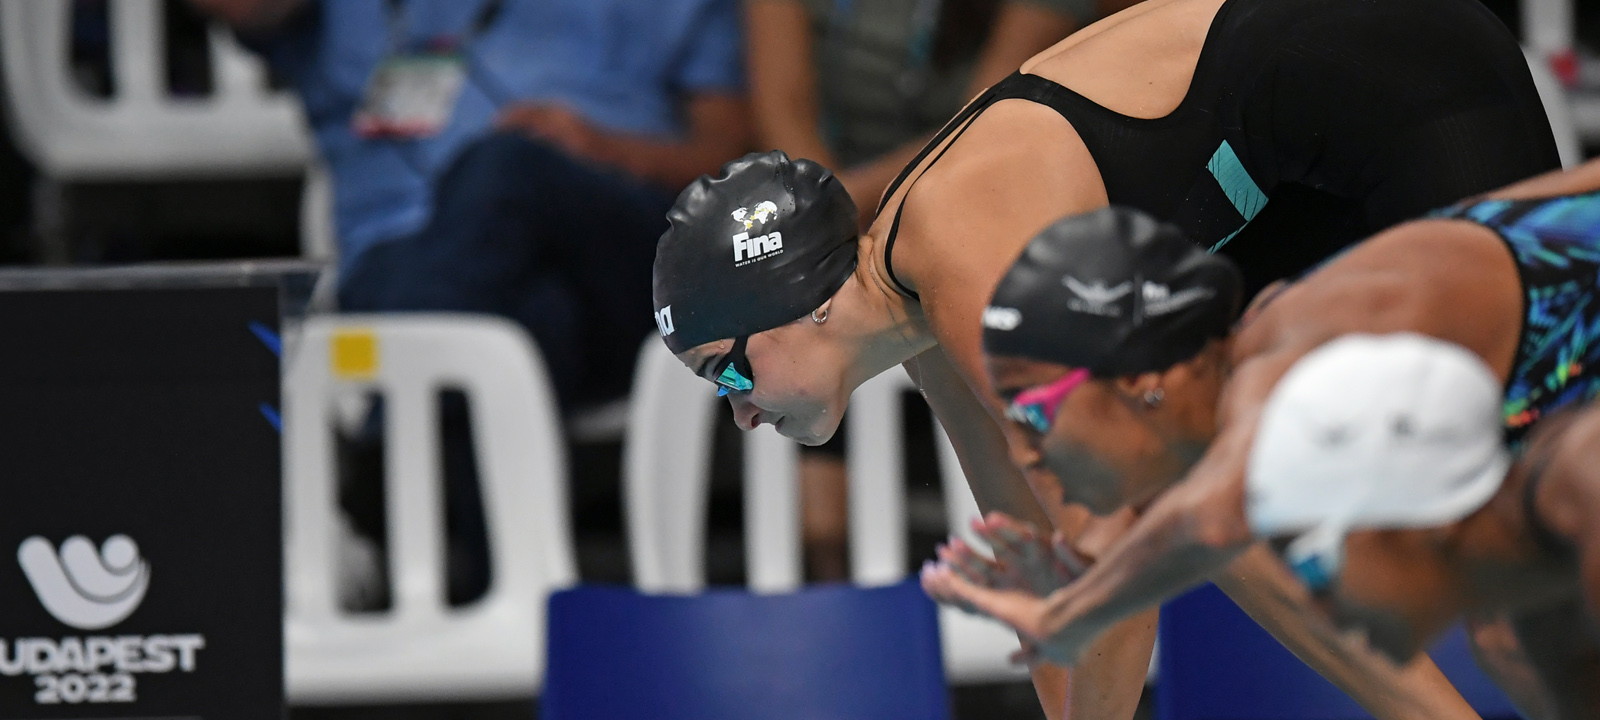 Which Swimmers Have the Most Instagram Followers?